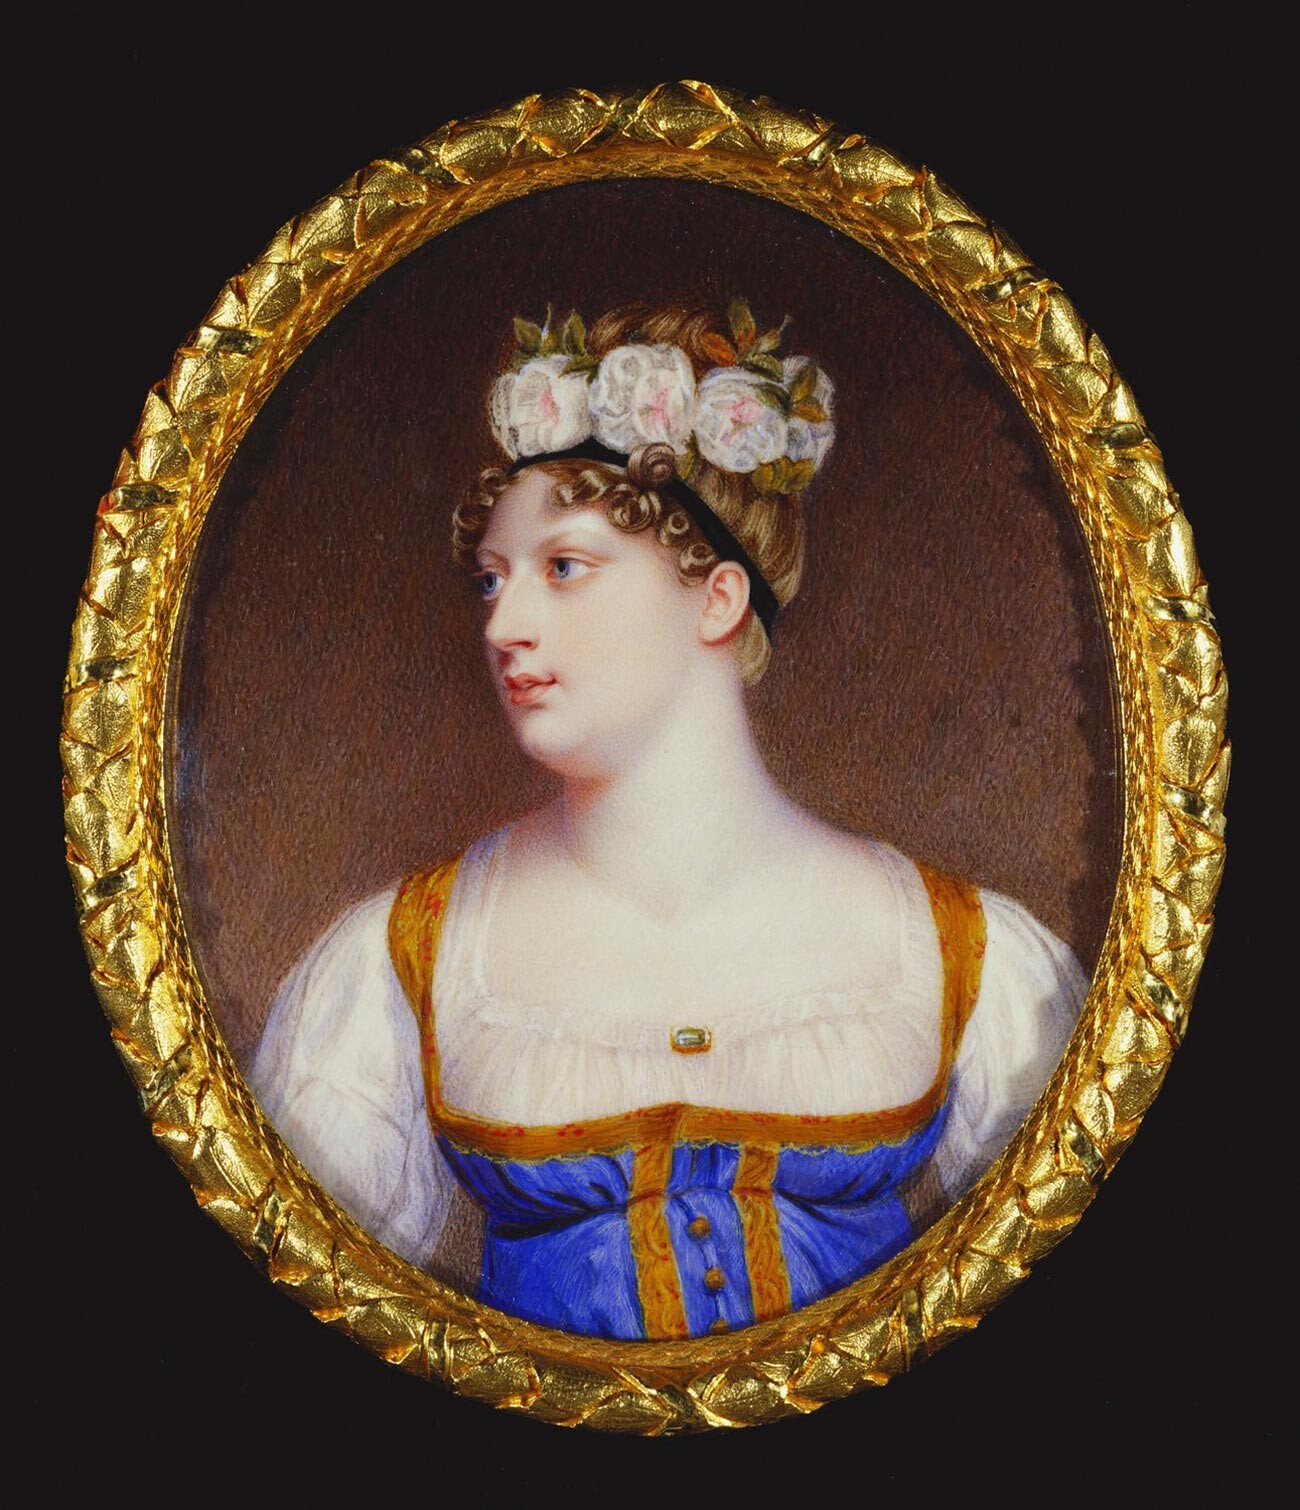 Princess Charlotte of Wales by Henry Collen. This miniature portrait is dated 1861.